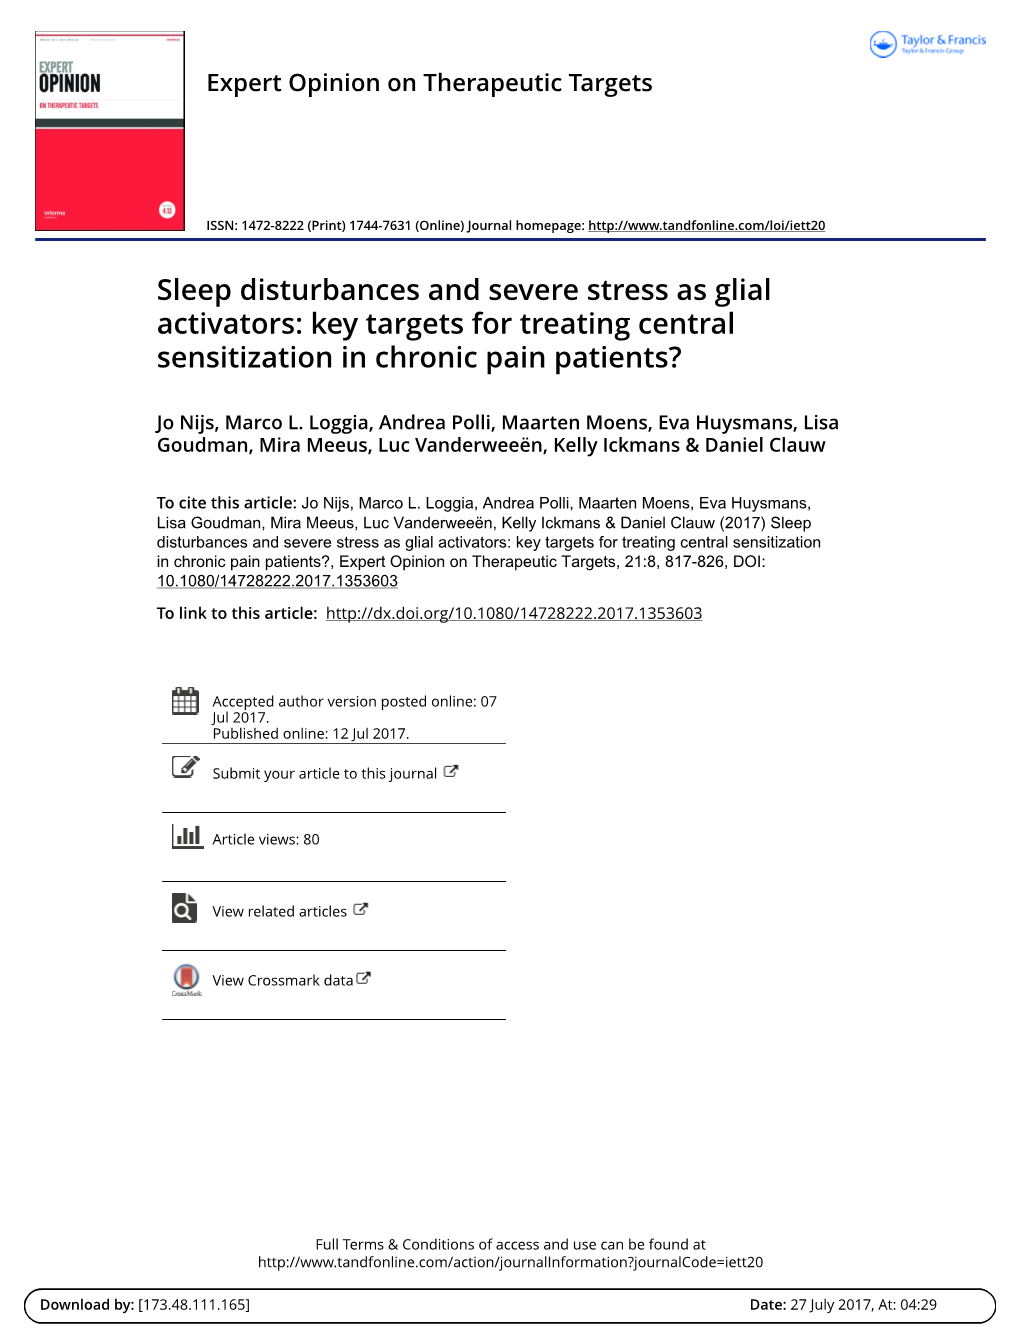 Key Targets for Treating Central Sensitization in Chronic Pain Patients?